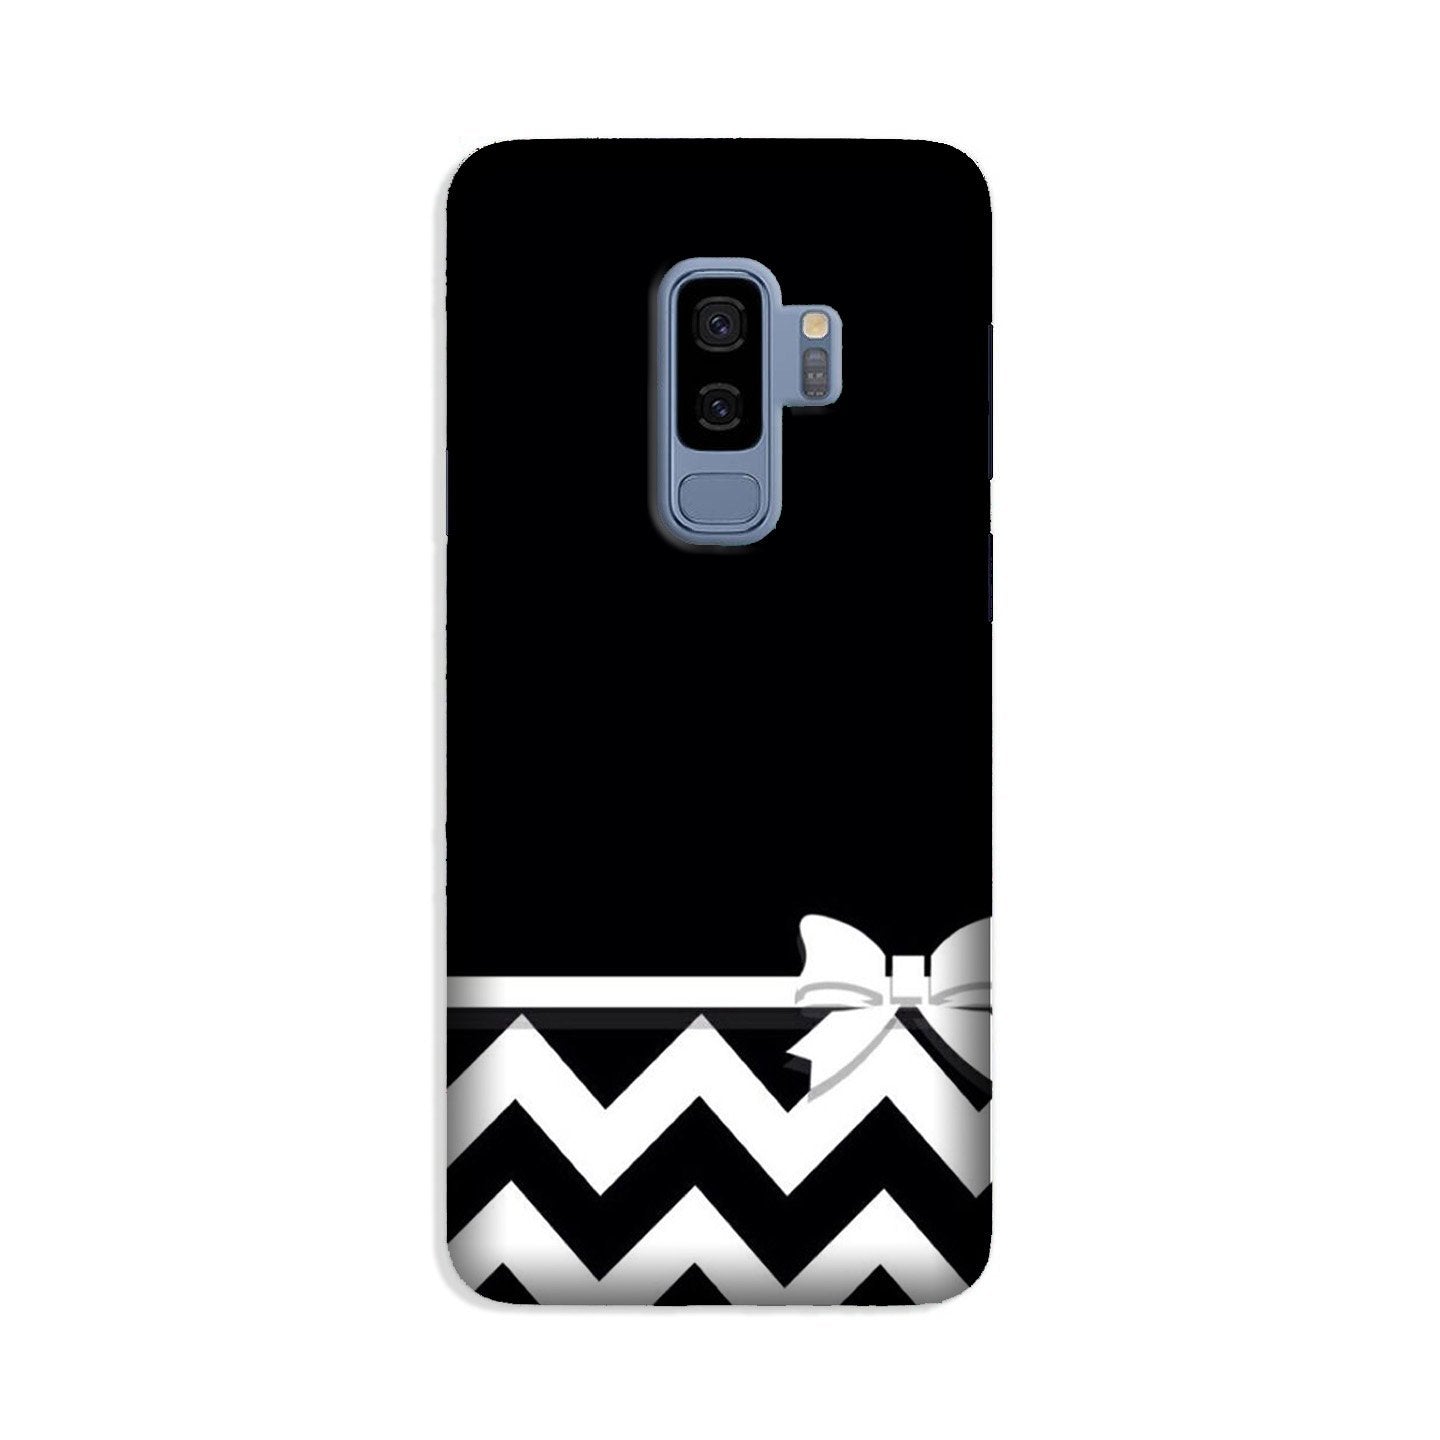 Gift Wrap7 Case for Galaxy S9 Plus